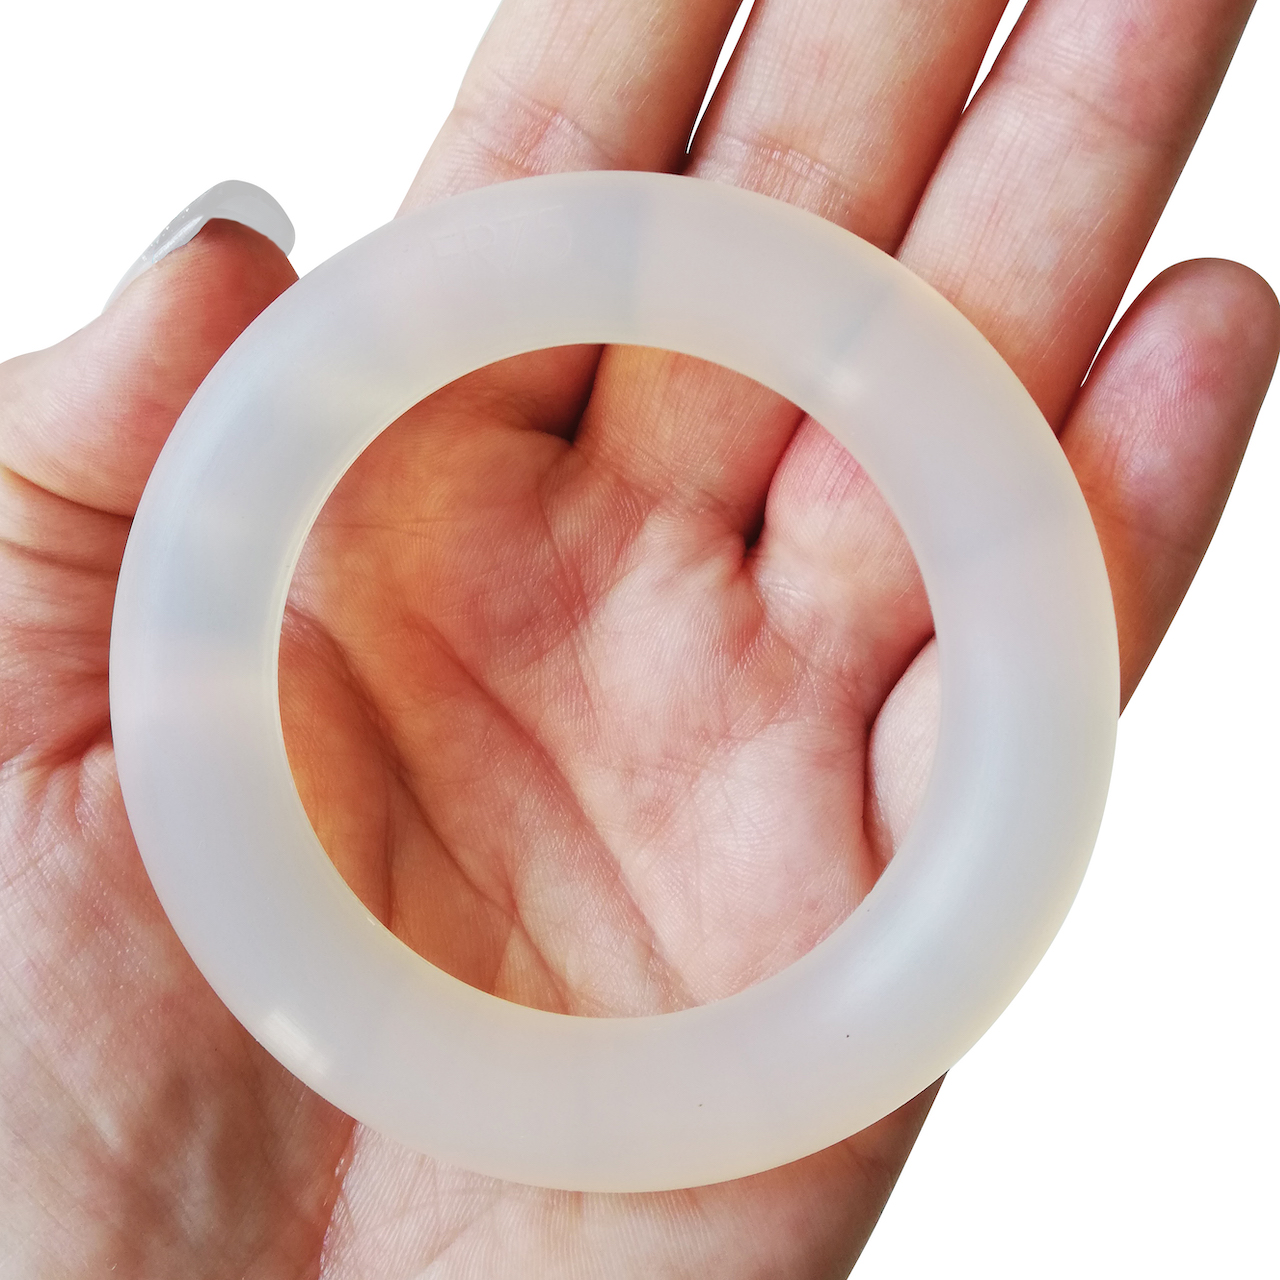 Ring Vaginal Pessary SILICONE SIZE 50mm 65mm Non Sterile SET of 2 | eBay